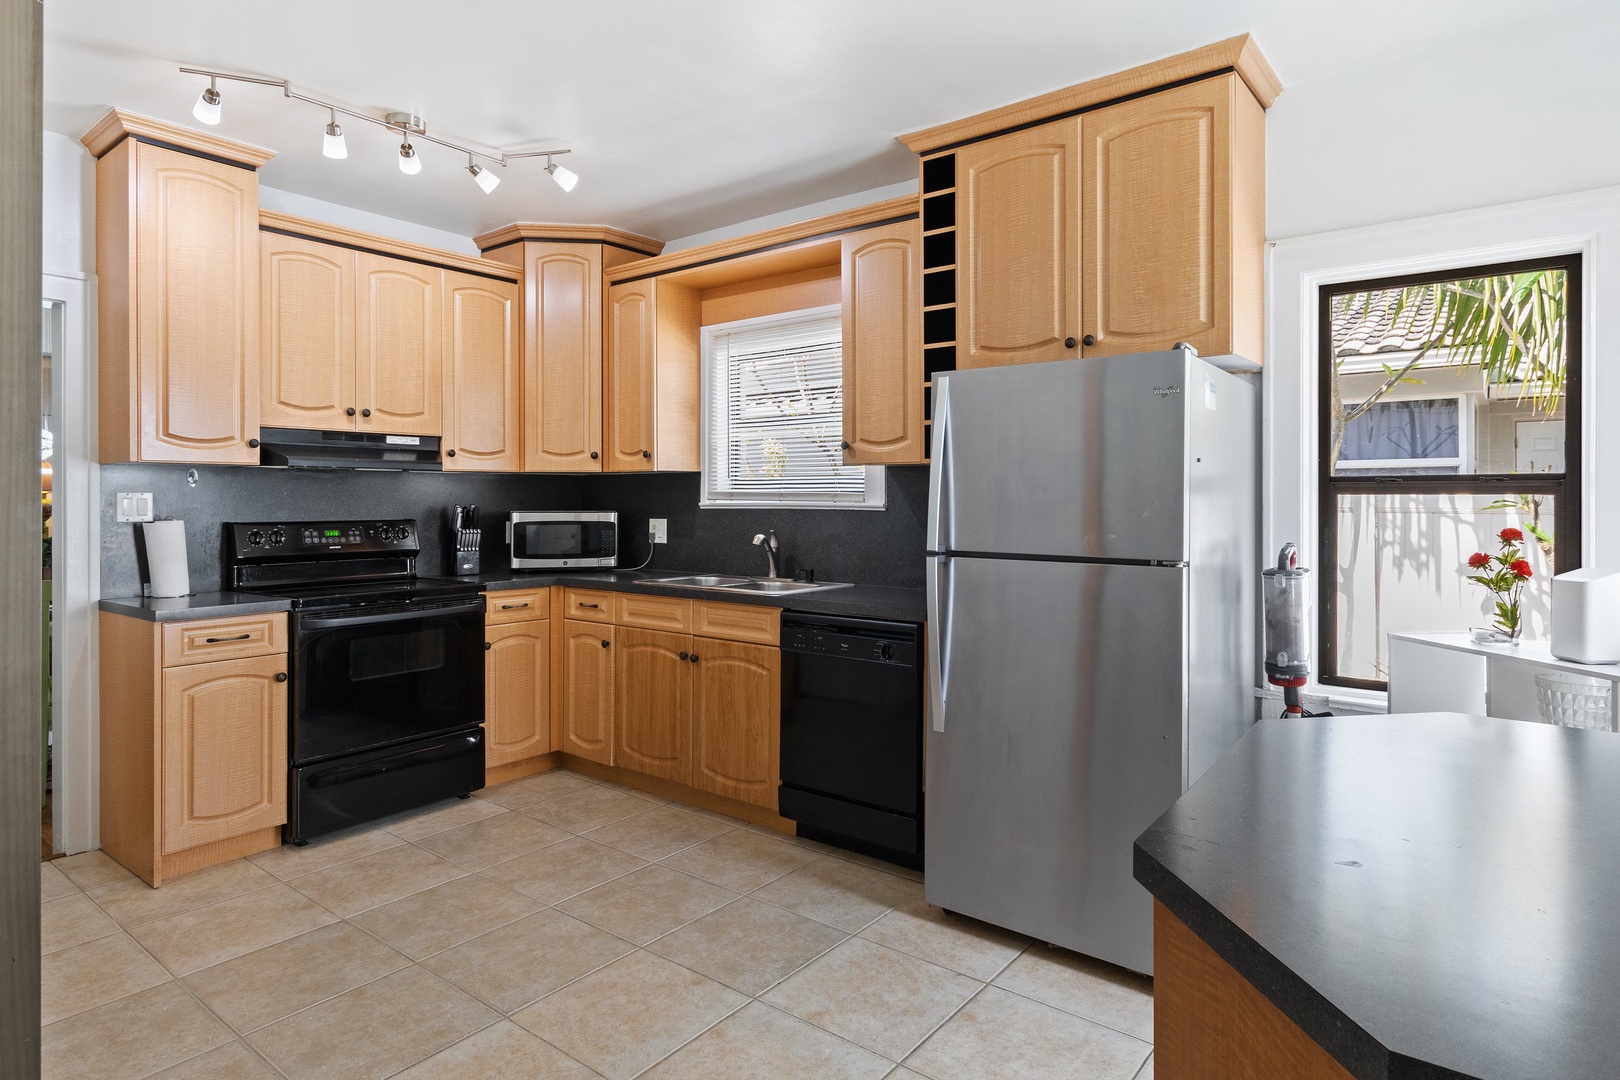 The warm, inviting kitchen offers ample space & all the comforts of home